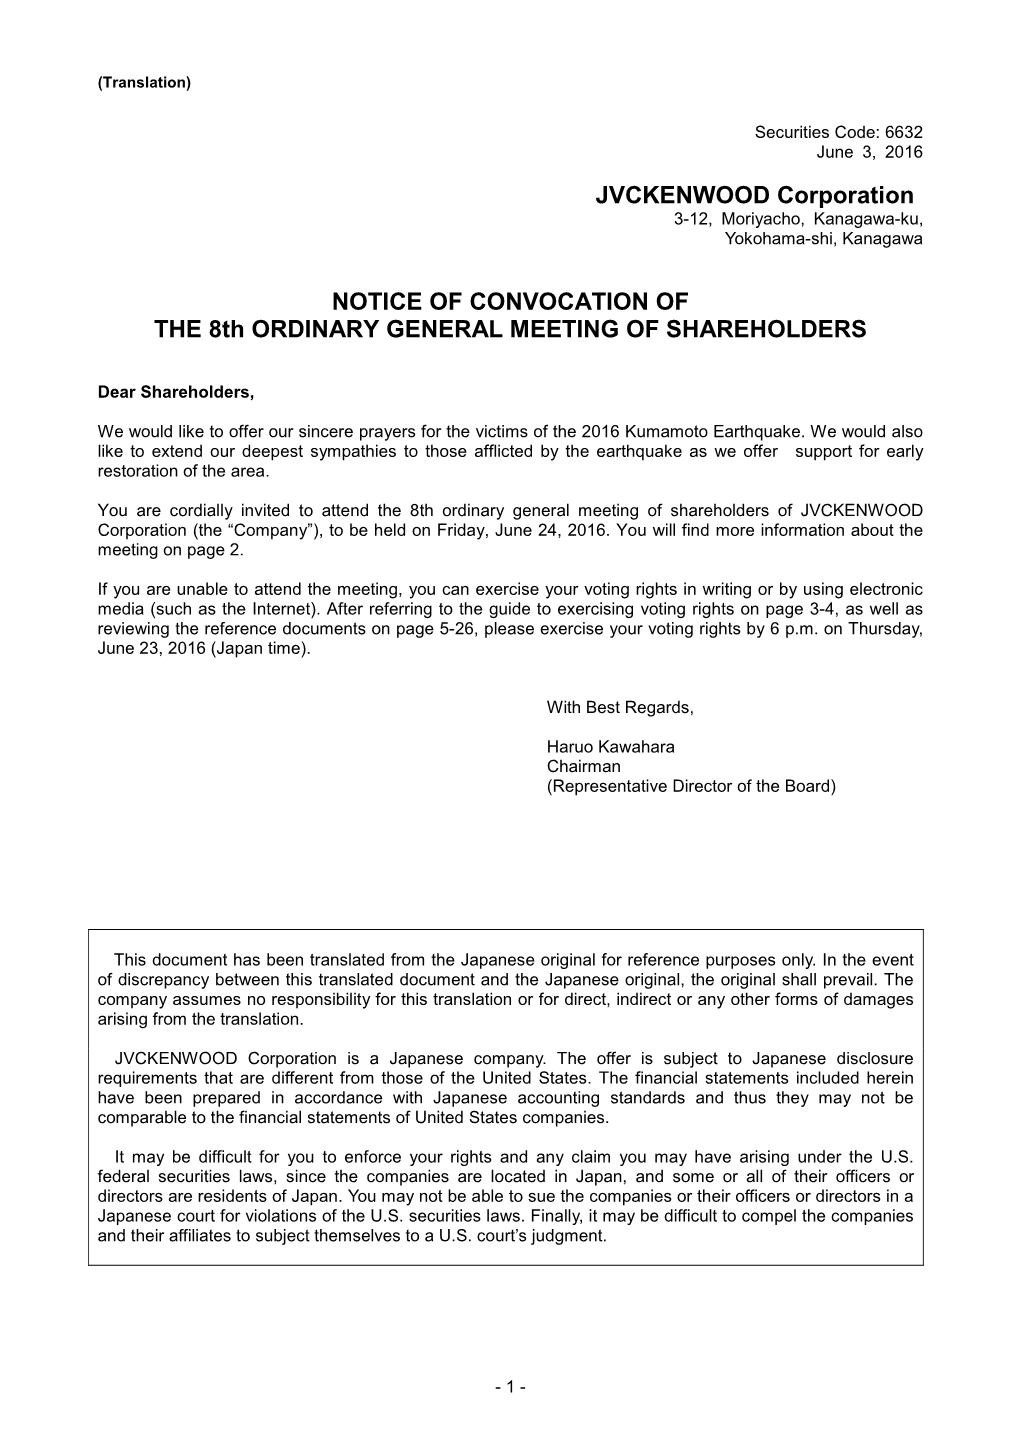 JVCKENWOOD Corporation NOTICE of CONVOCATION of the 8Th